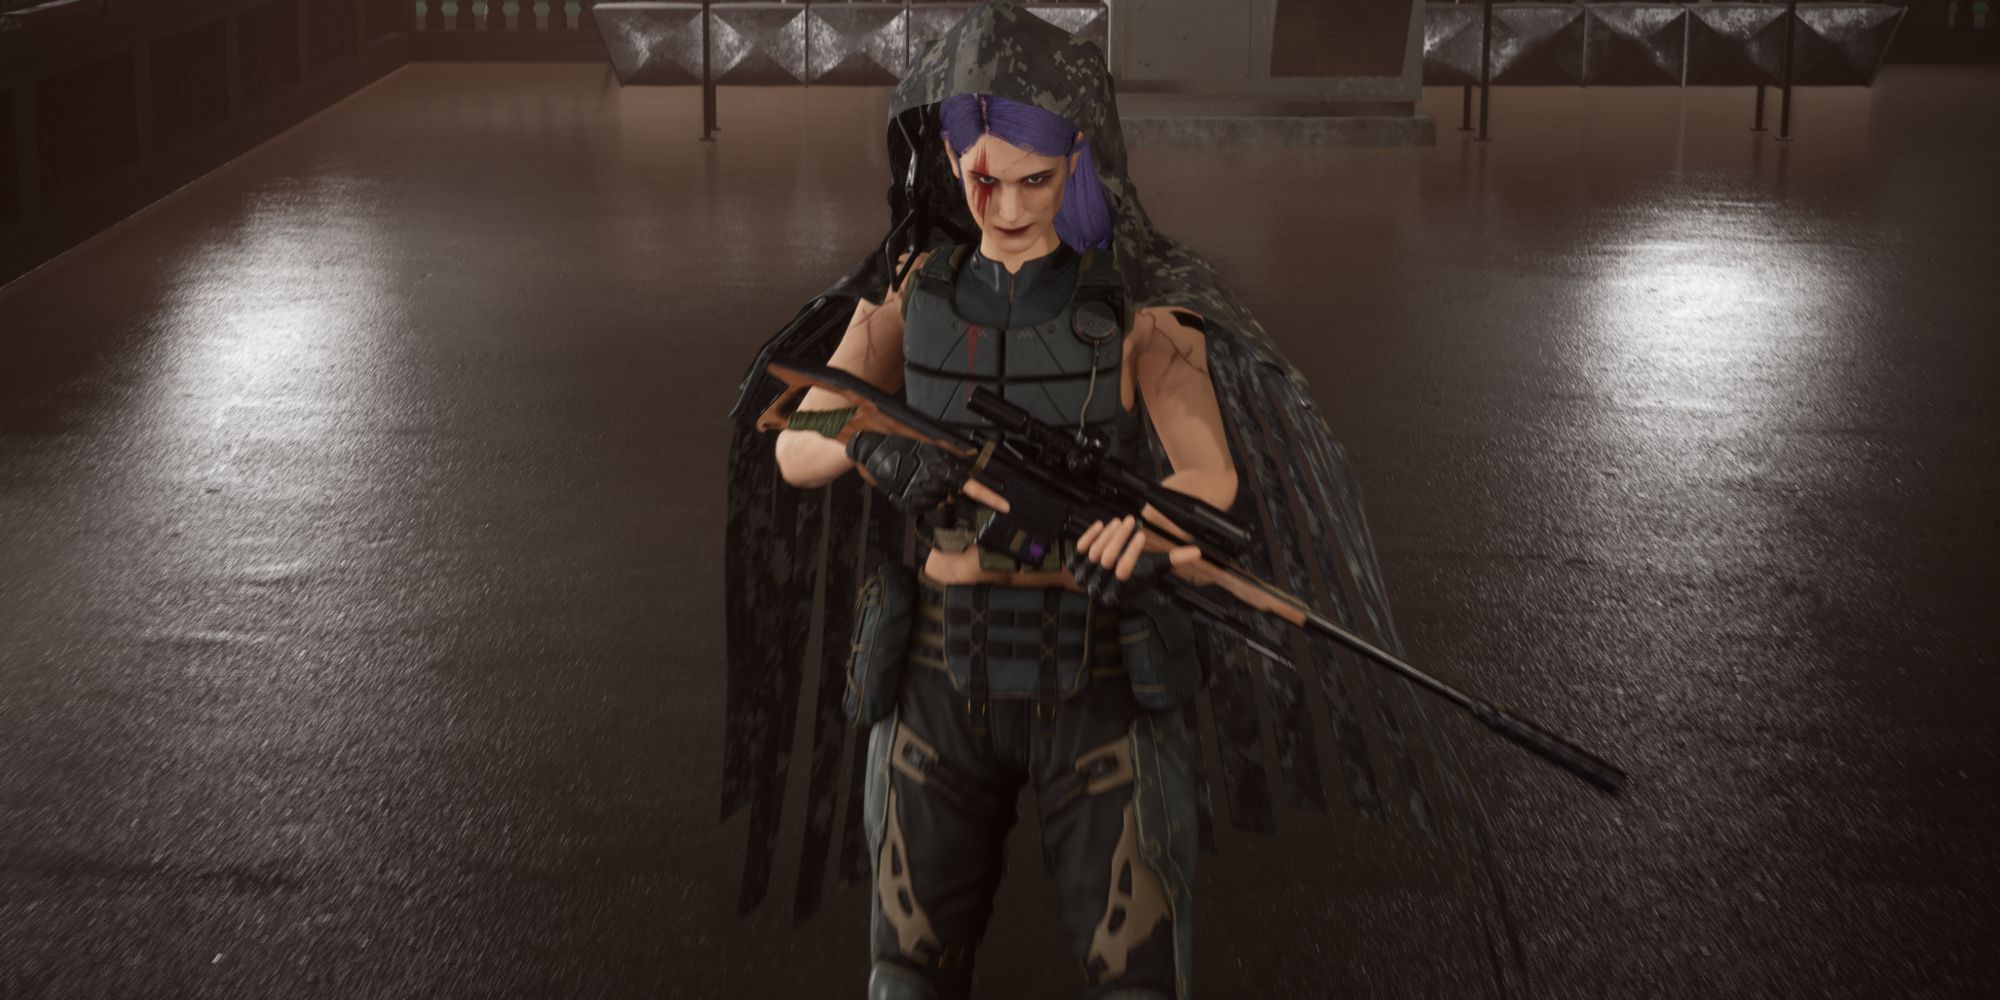 This image showcases Kolchak from Wanted: Dead, a Sniper with a Digital Camouflage Cloak, Purple Hair, and a Red Mark across her right eye.